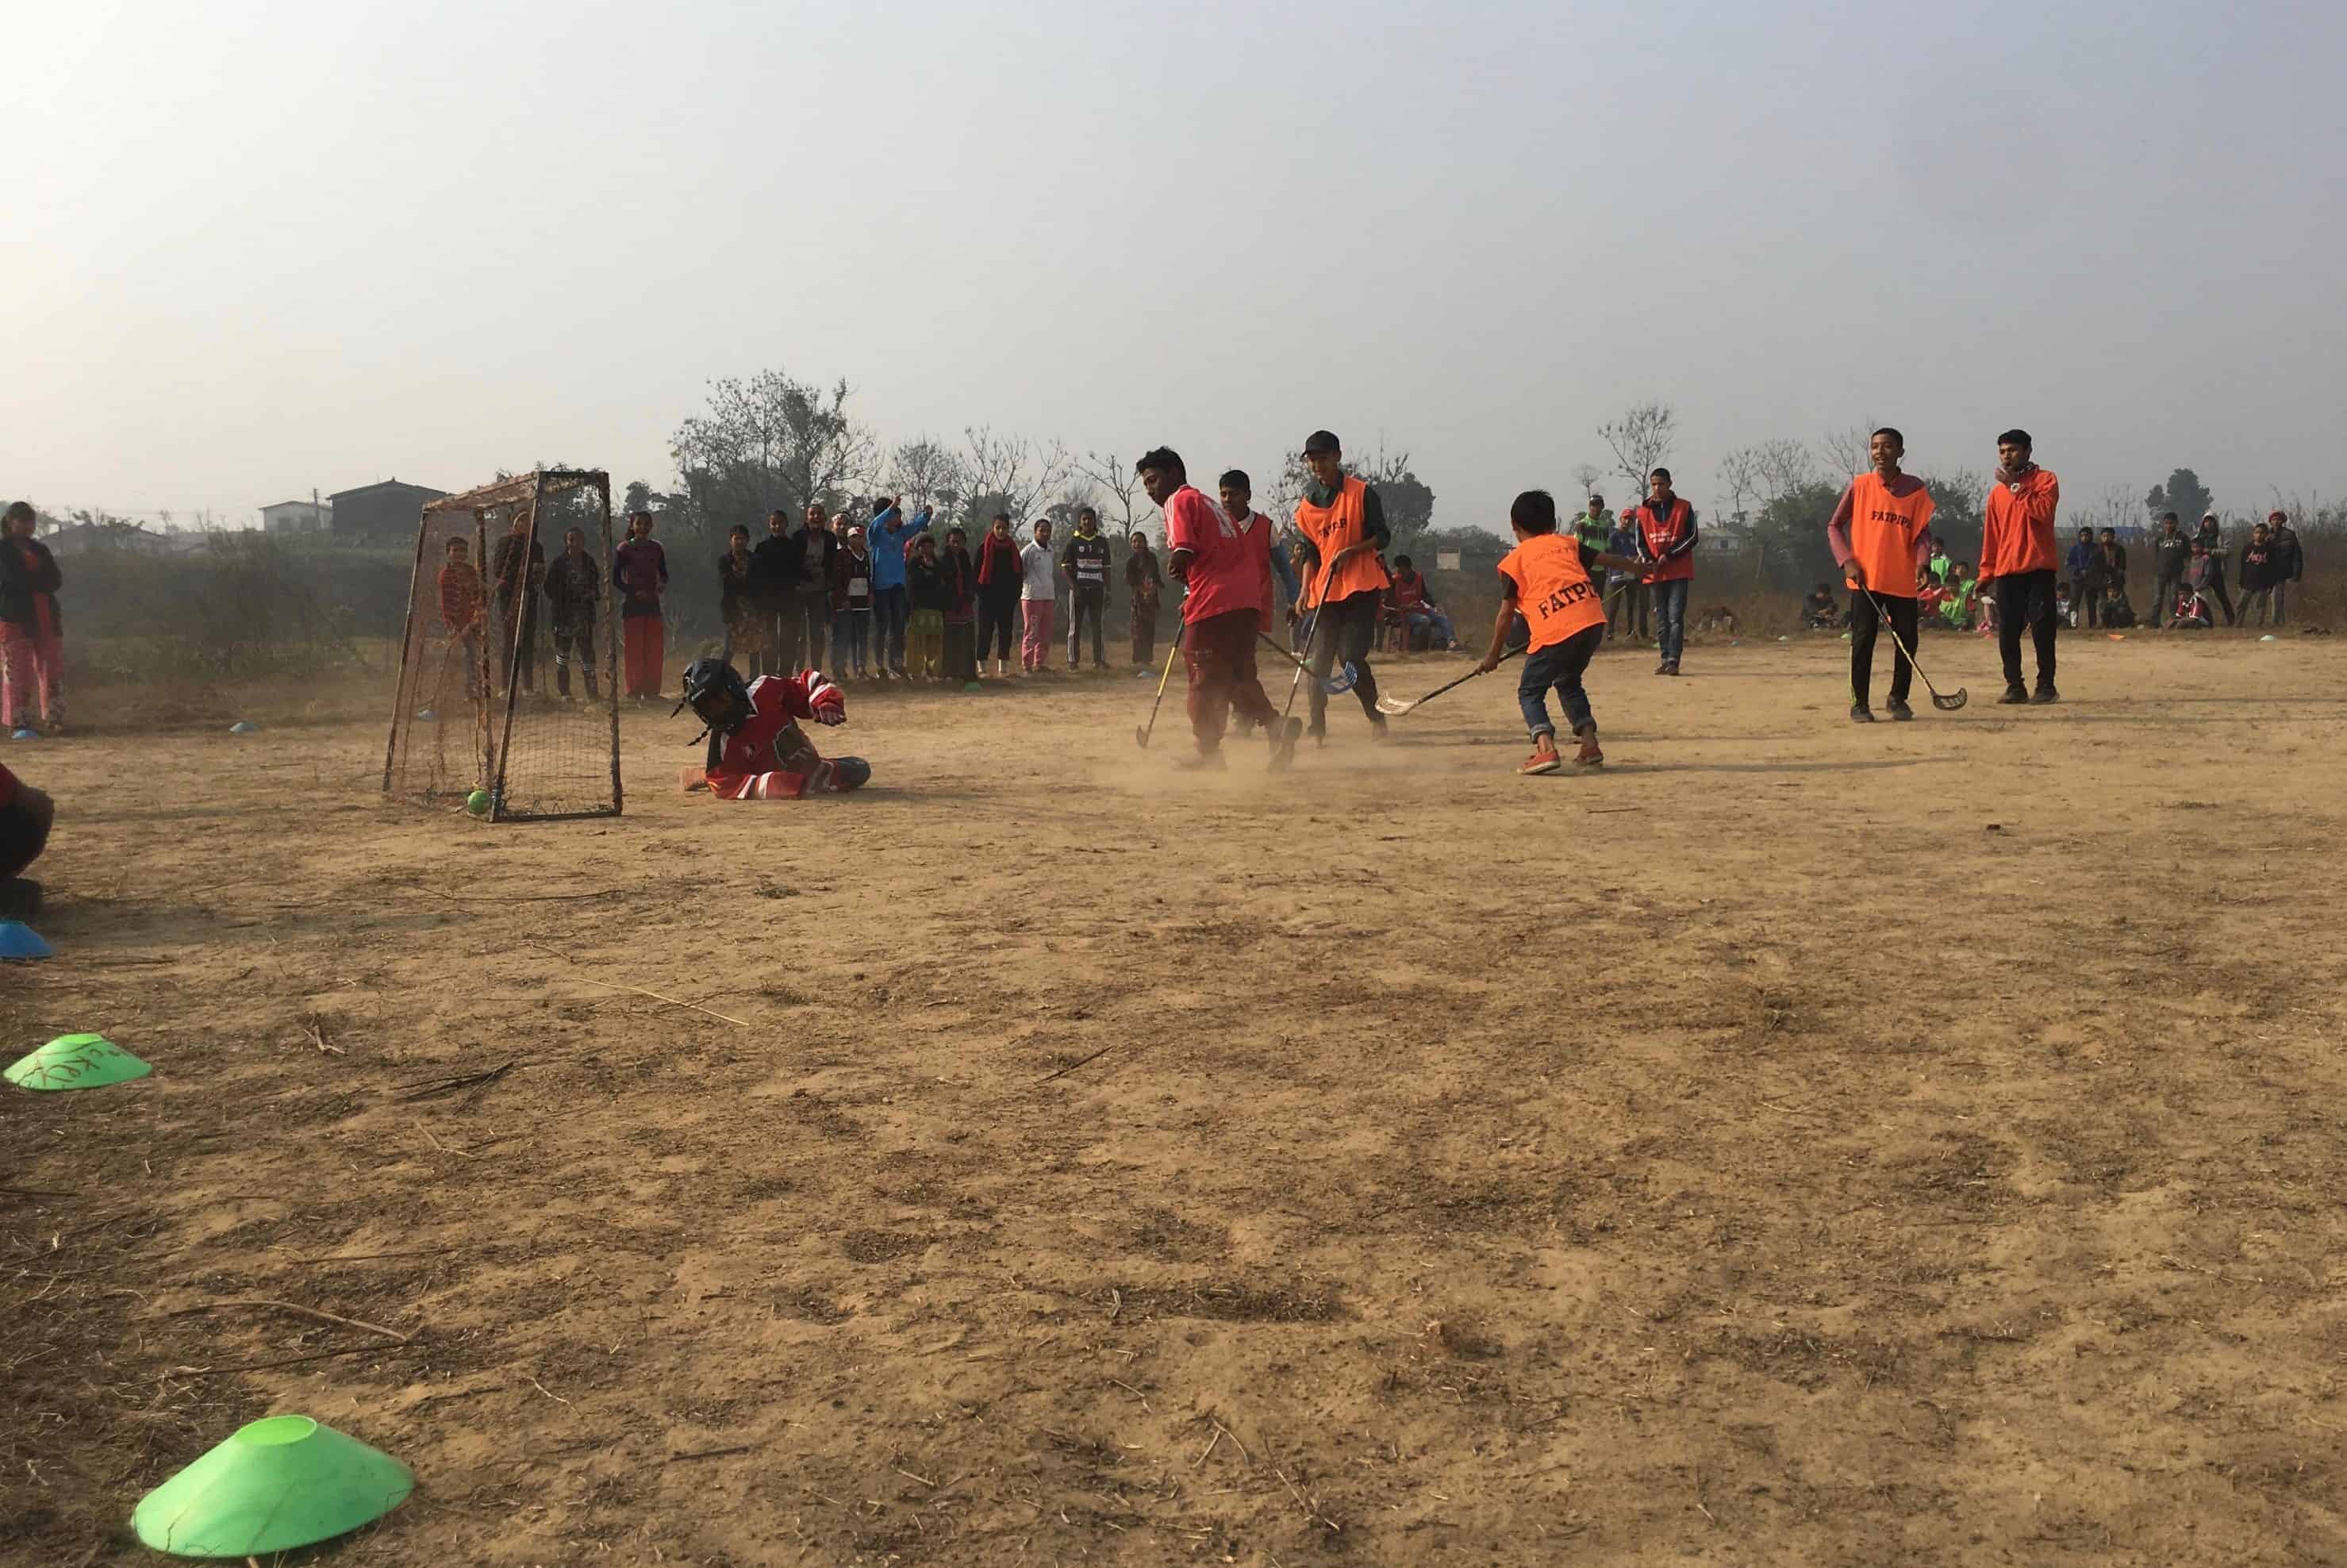 Students in Chitwan play field hockey as part of the day camps that Himalayan Life puts on